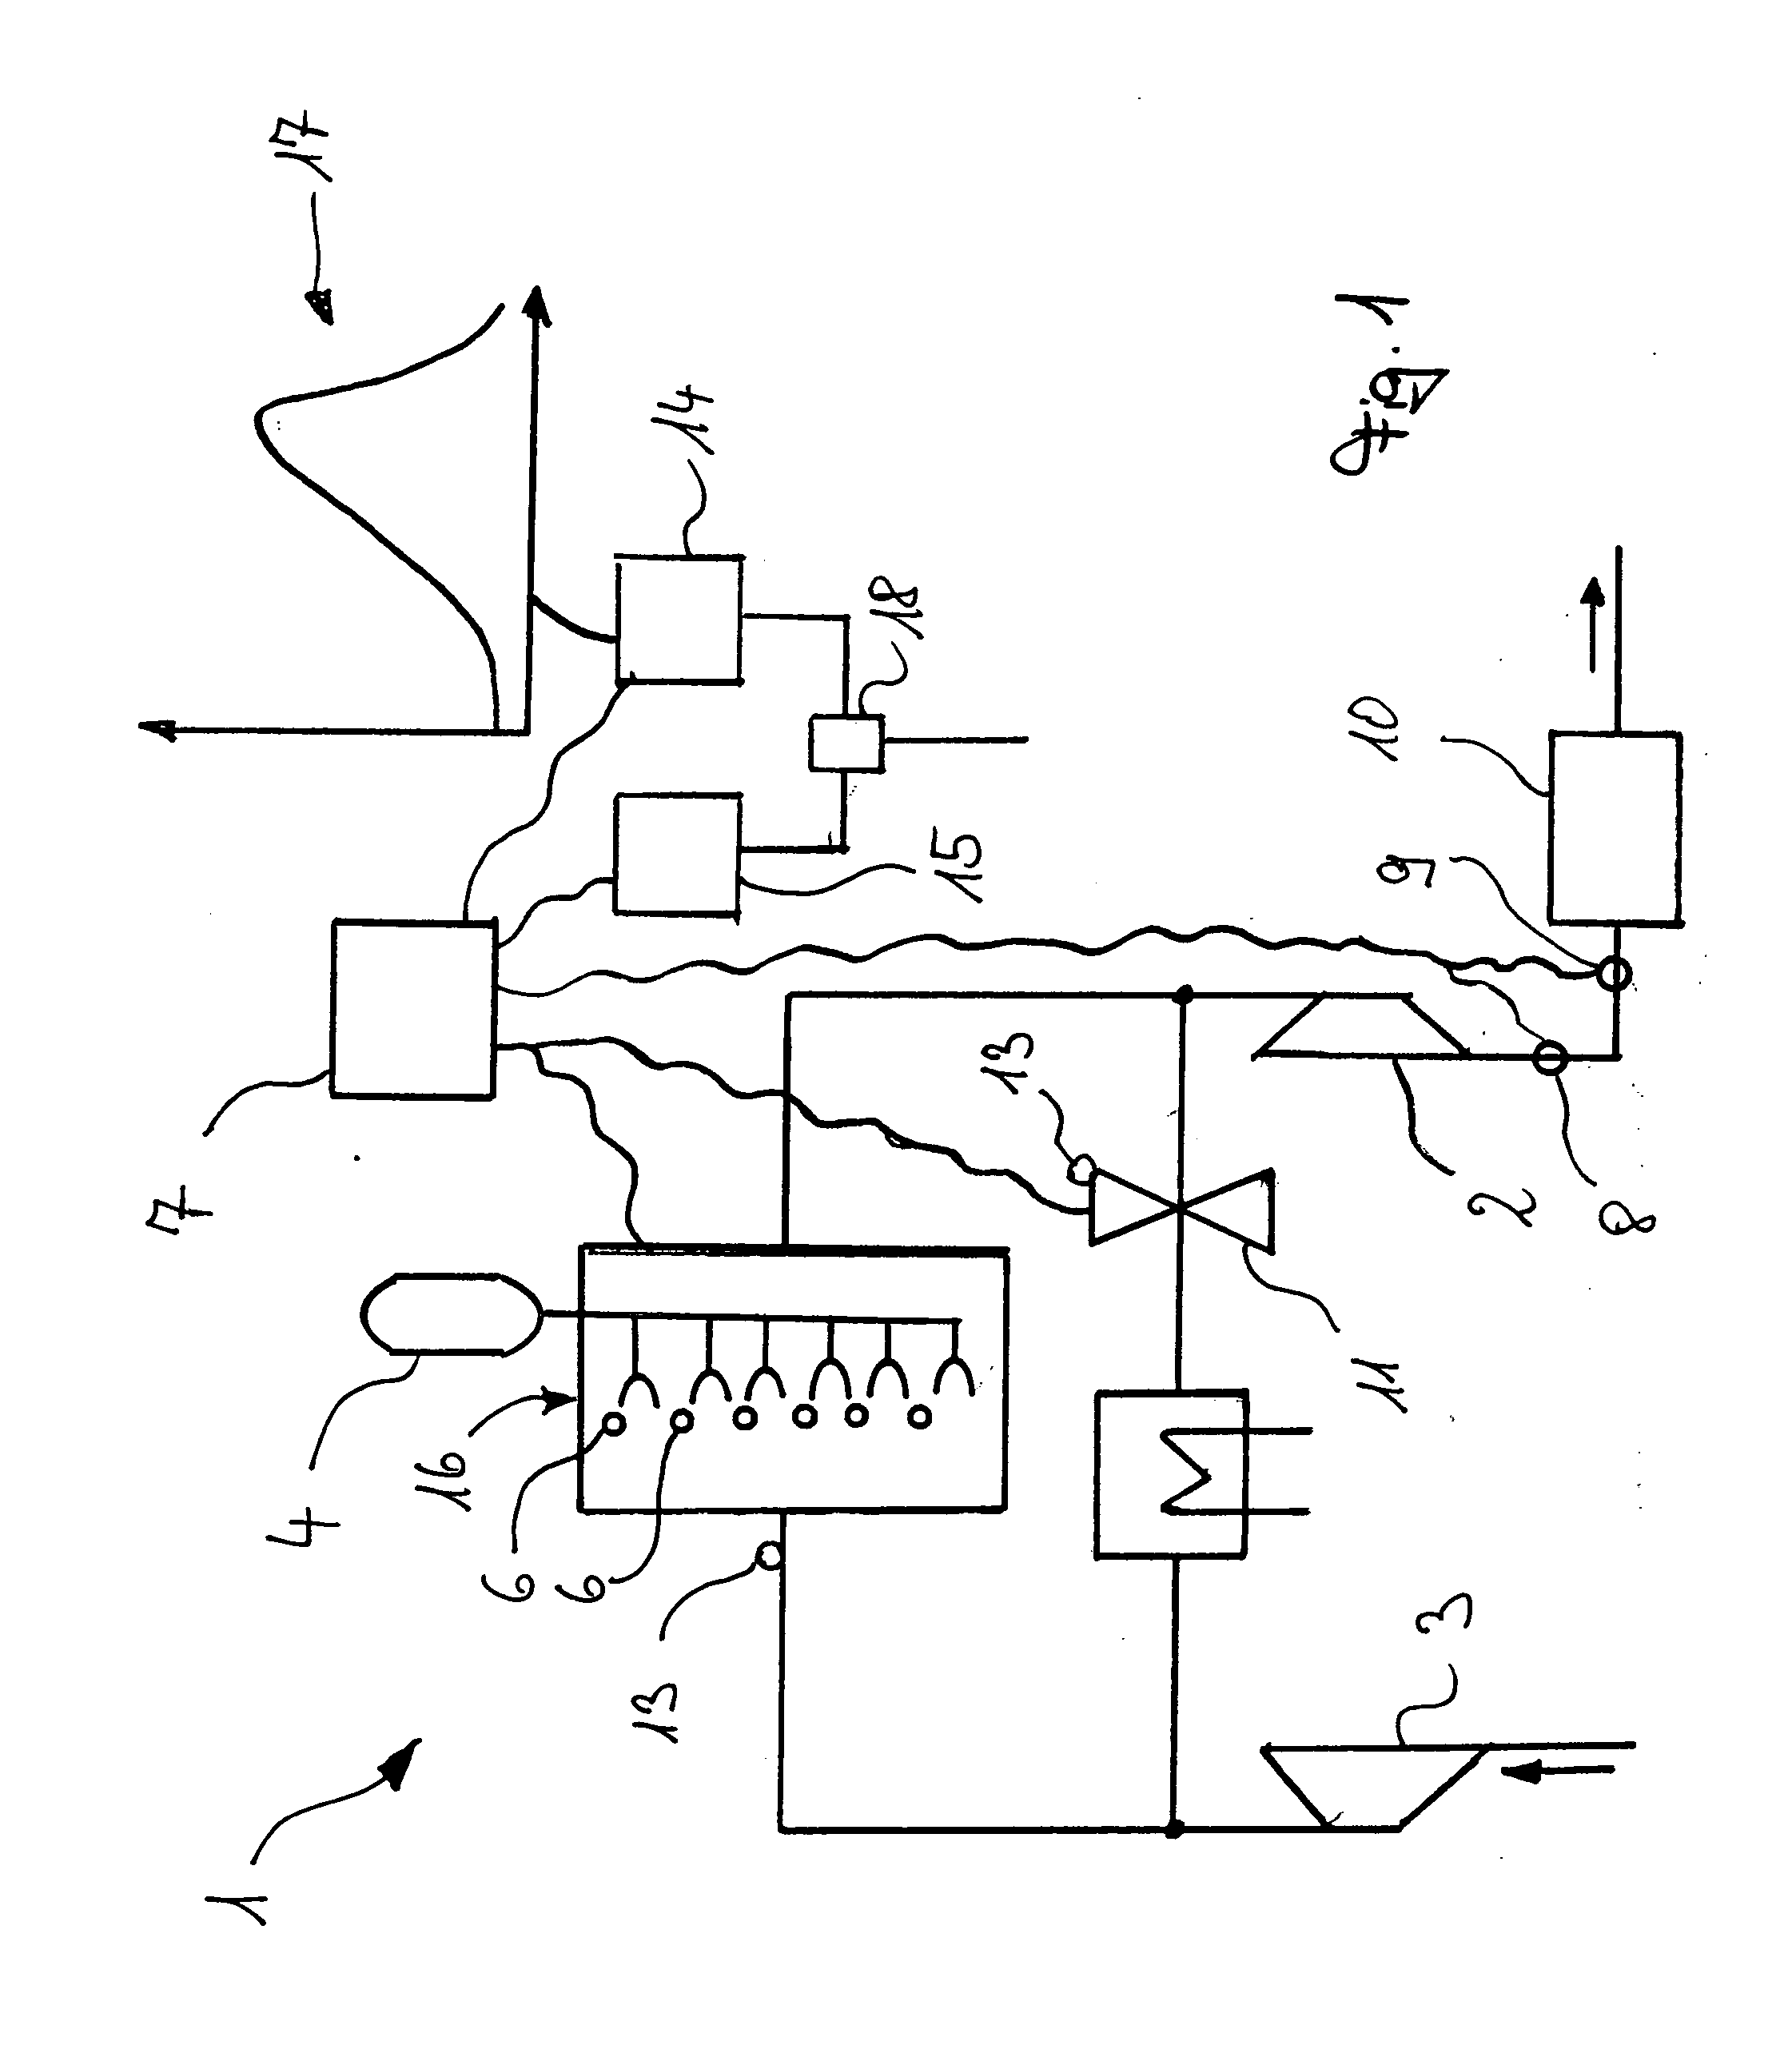 Control of a motor vehicle internal combustion engine